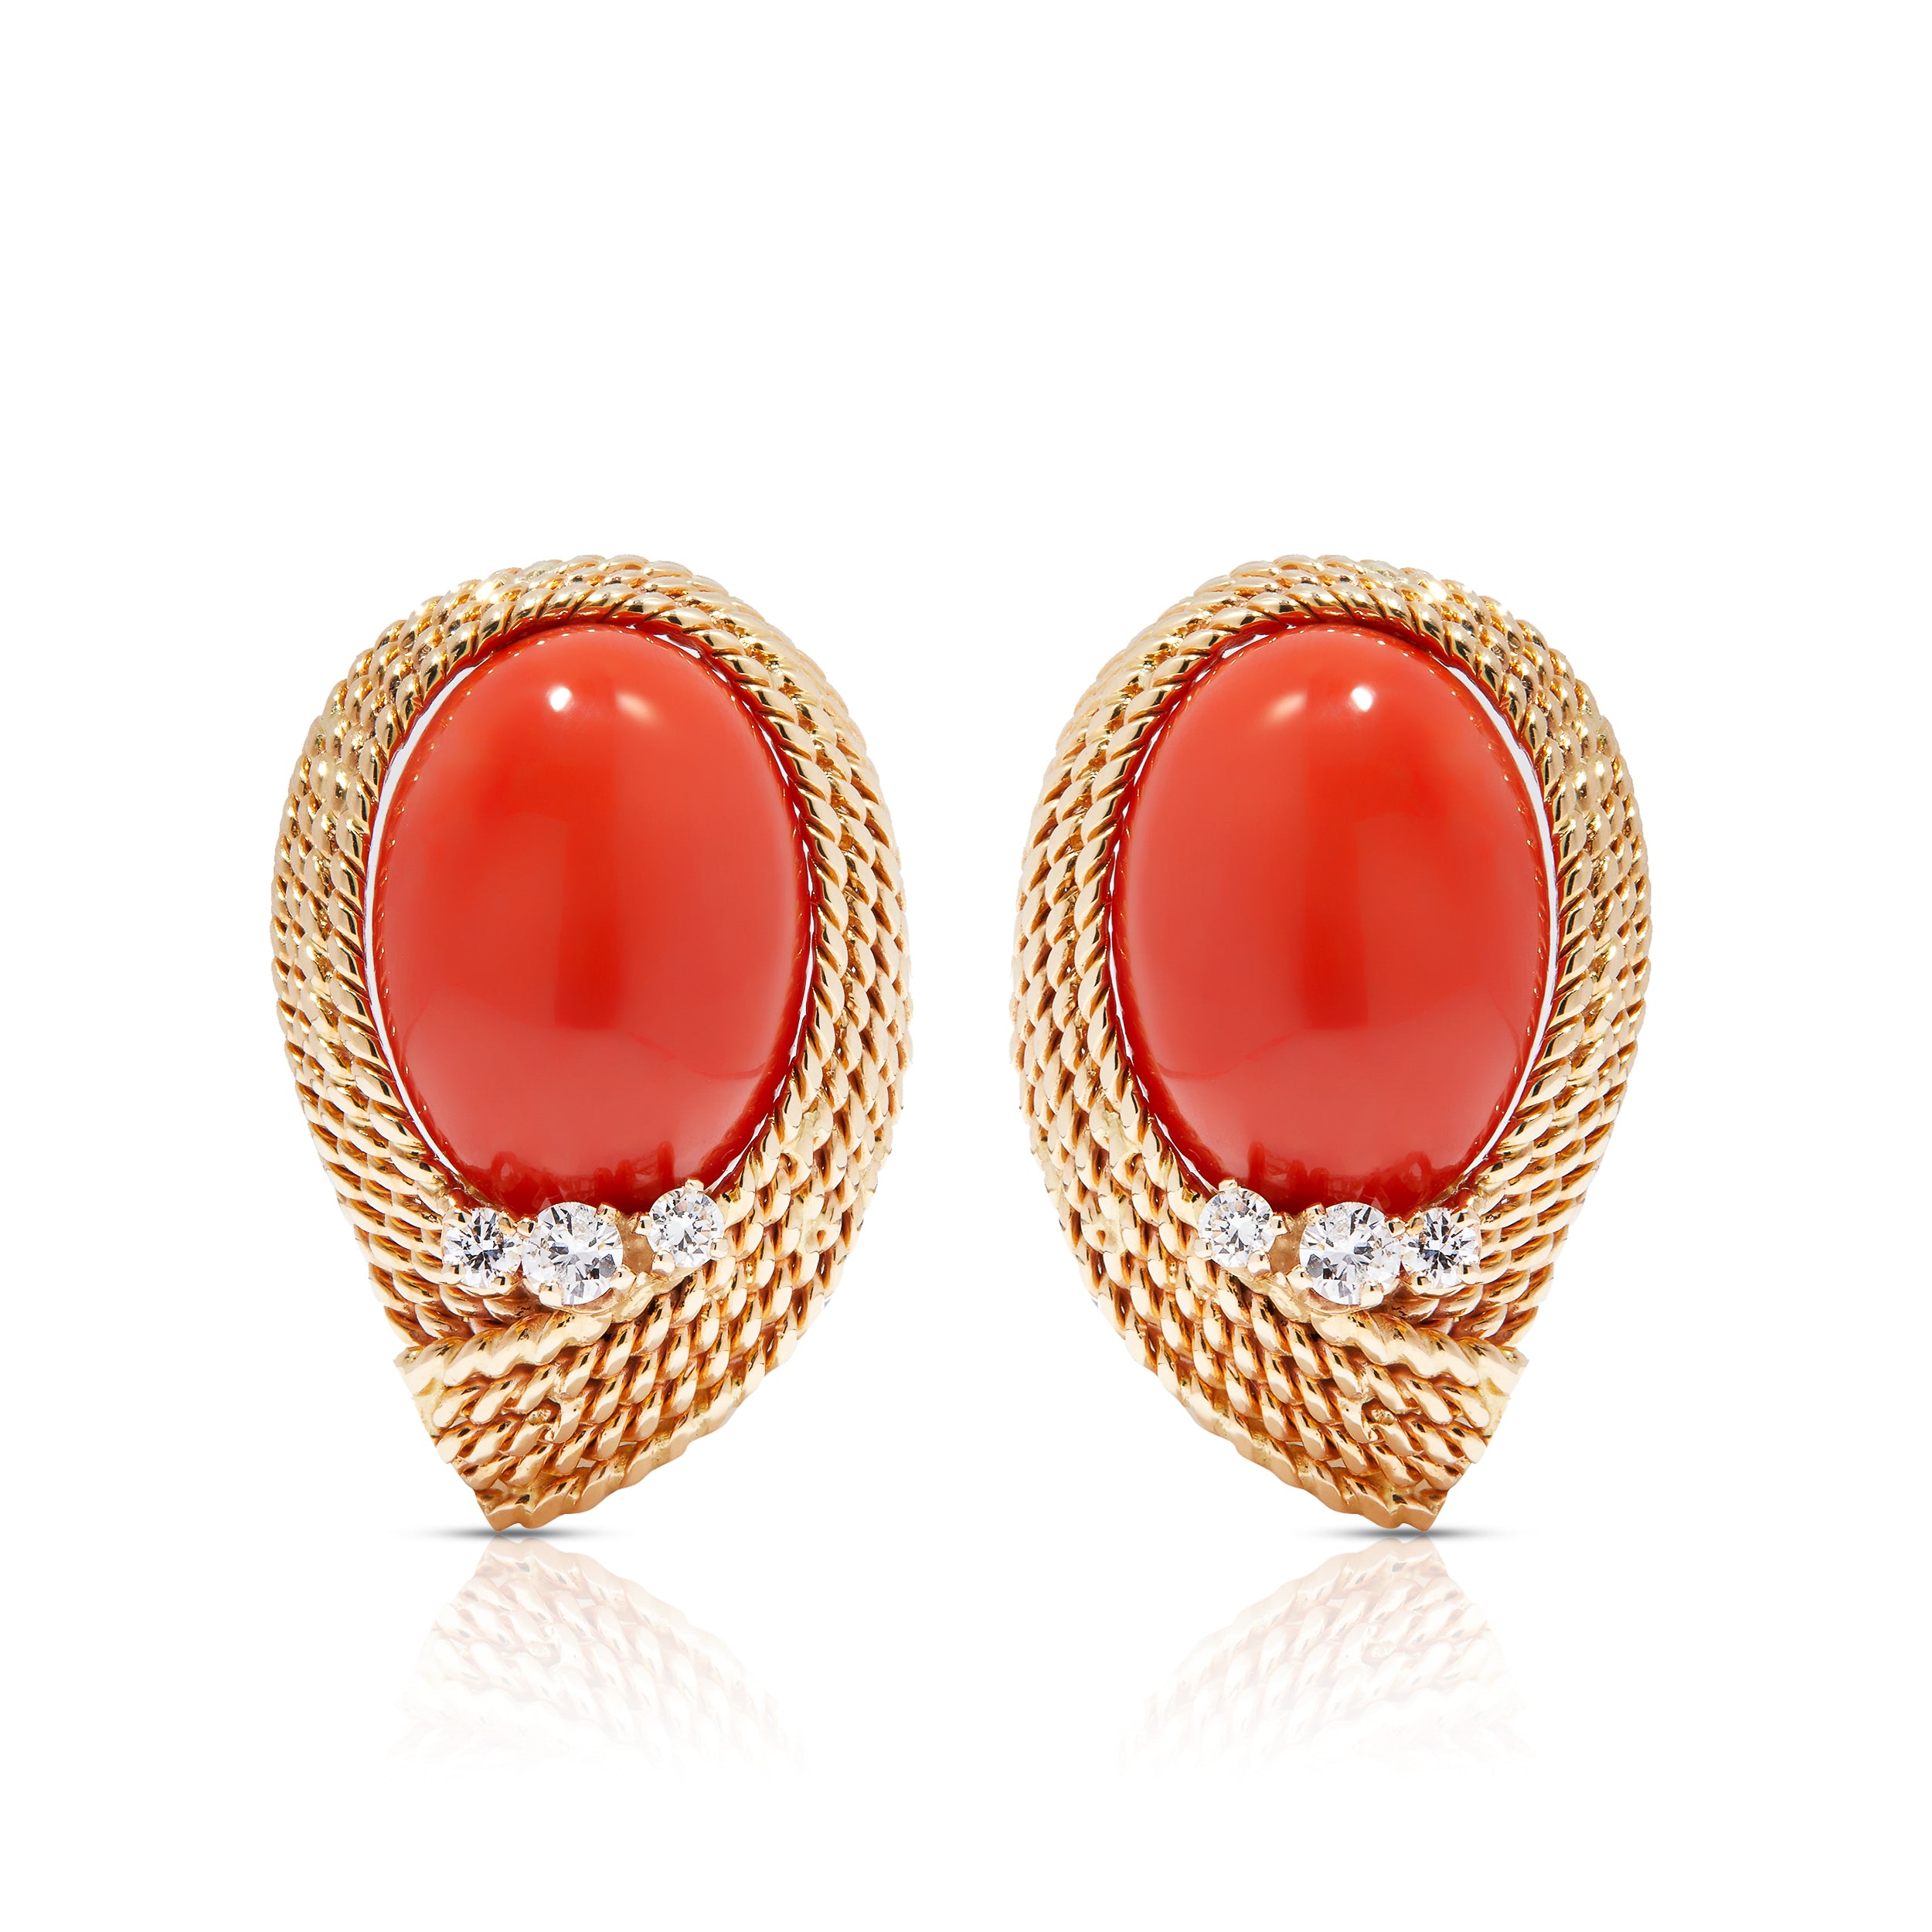 Pre-owned designer earrings with gold, corals, and diamonds